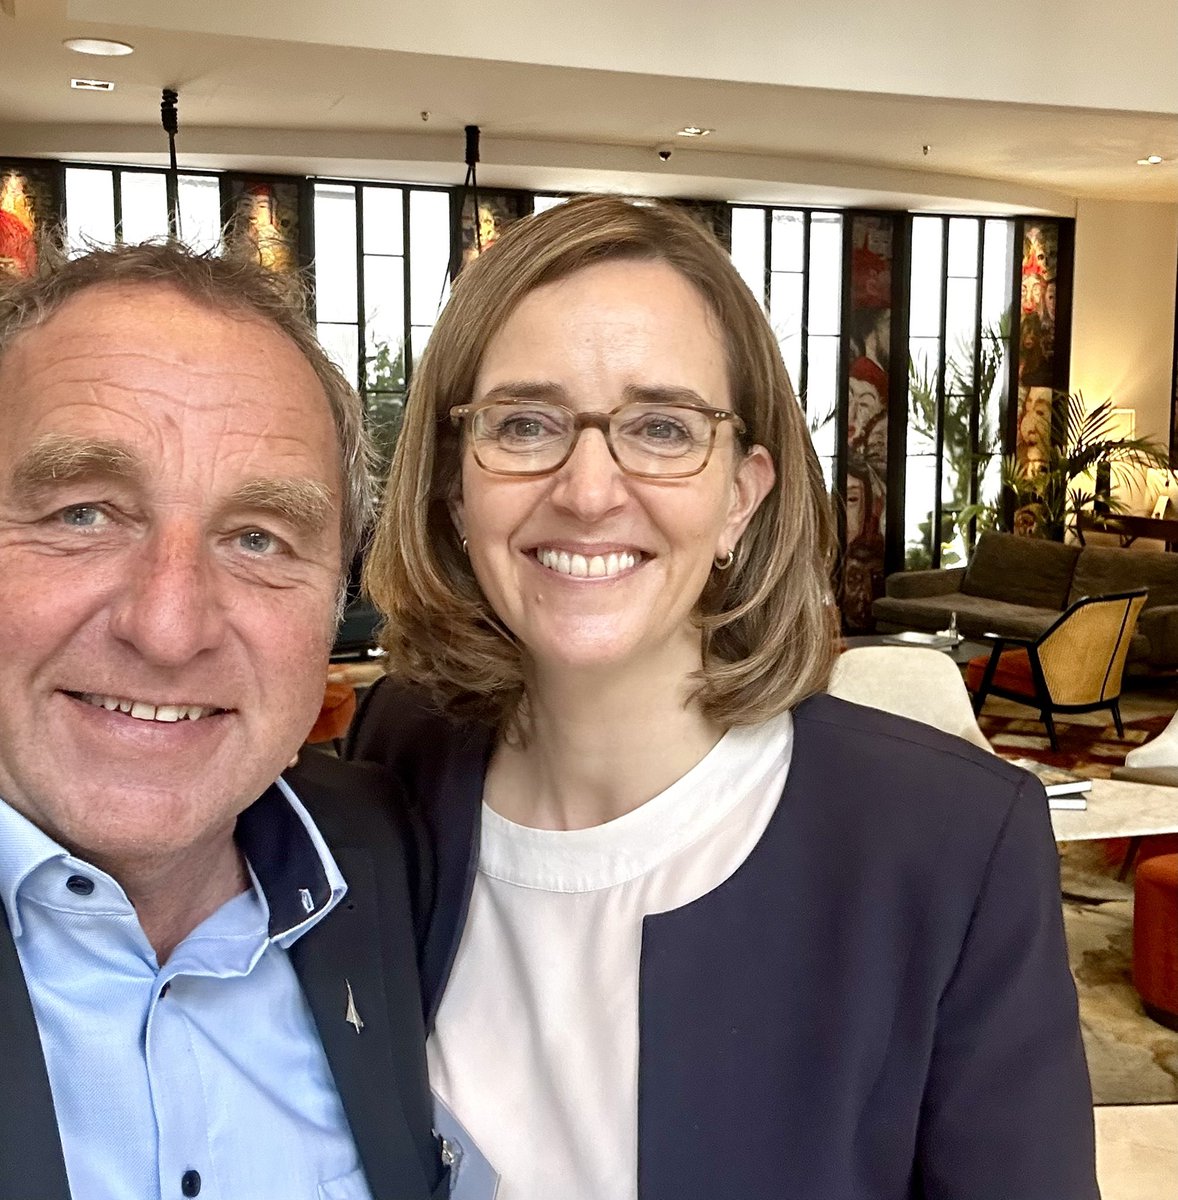 #CEOinterview with Dorothea von Boxberg, @FlyingBrussels . In our wide-ranging conversation Dorothea outlined the carriers traditional and long existing expertise in Africa, the Africa hub plan in Brussels together with United Airlines and Air Canada and future fleet development